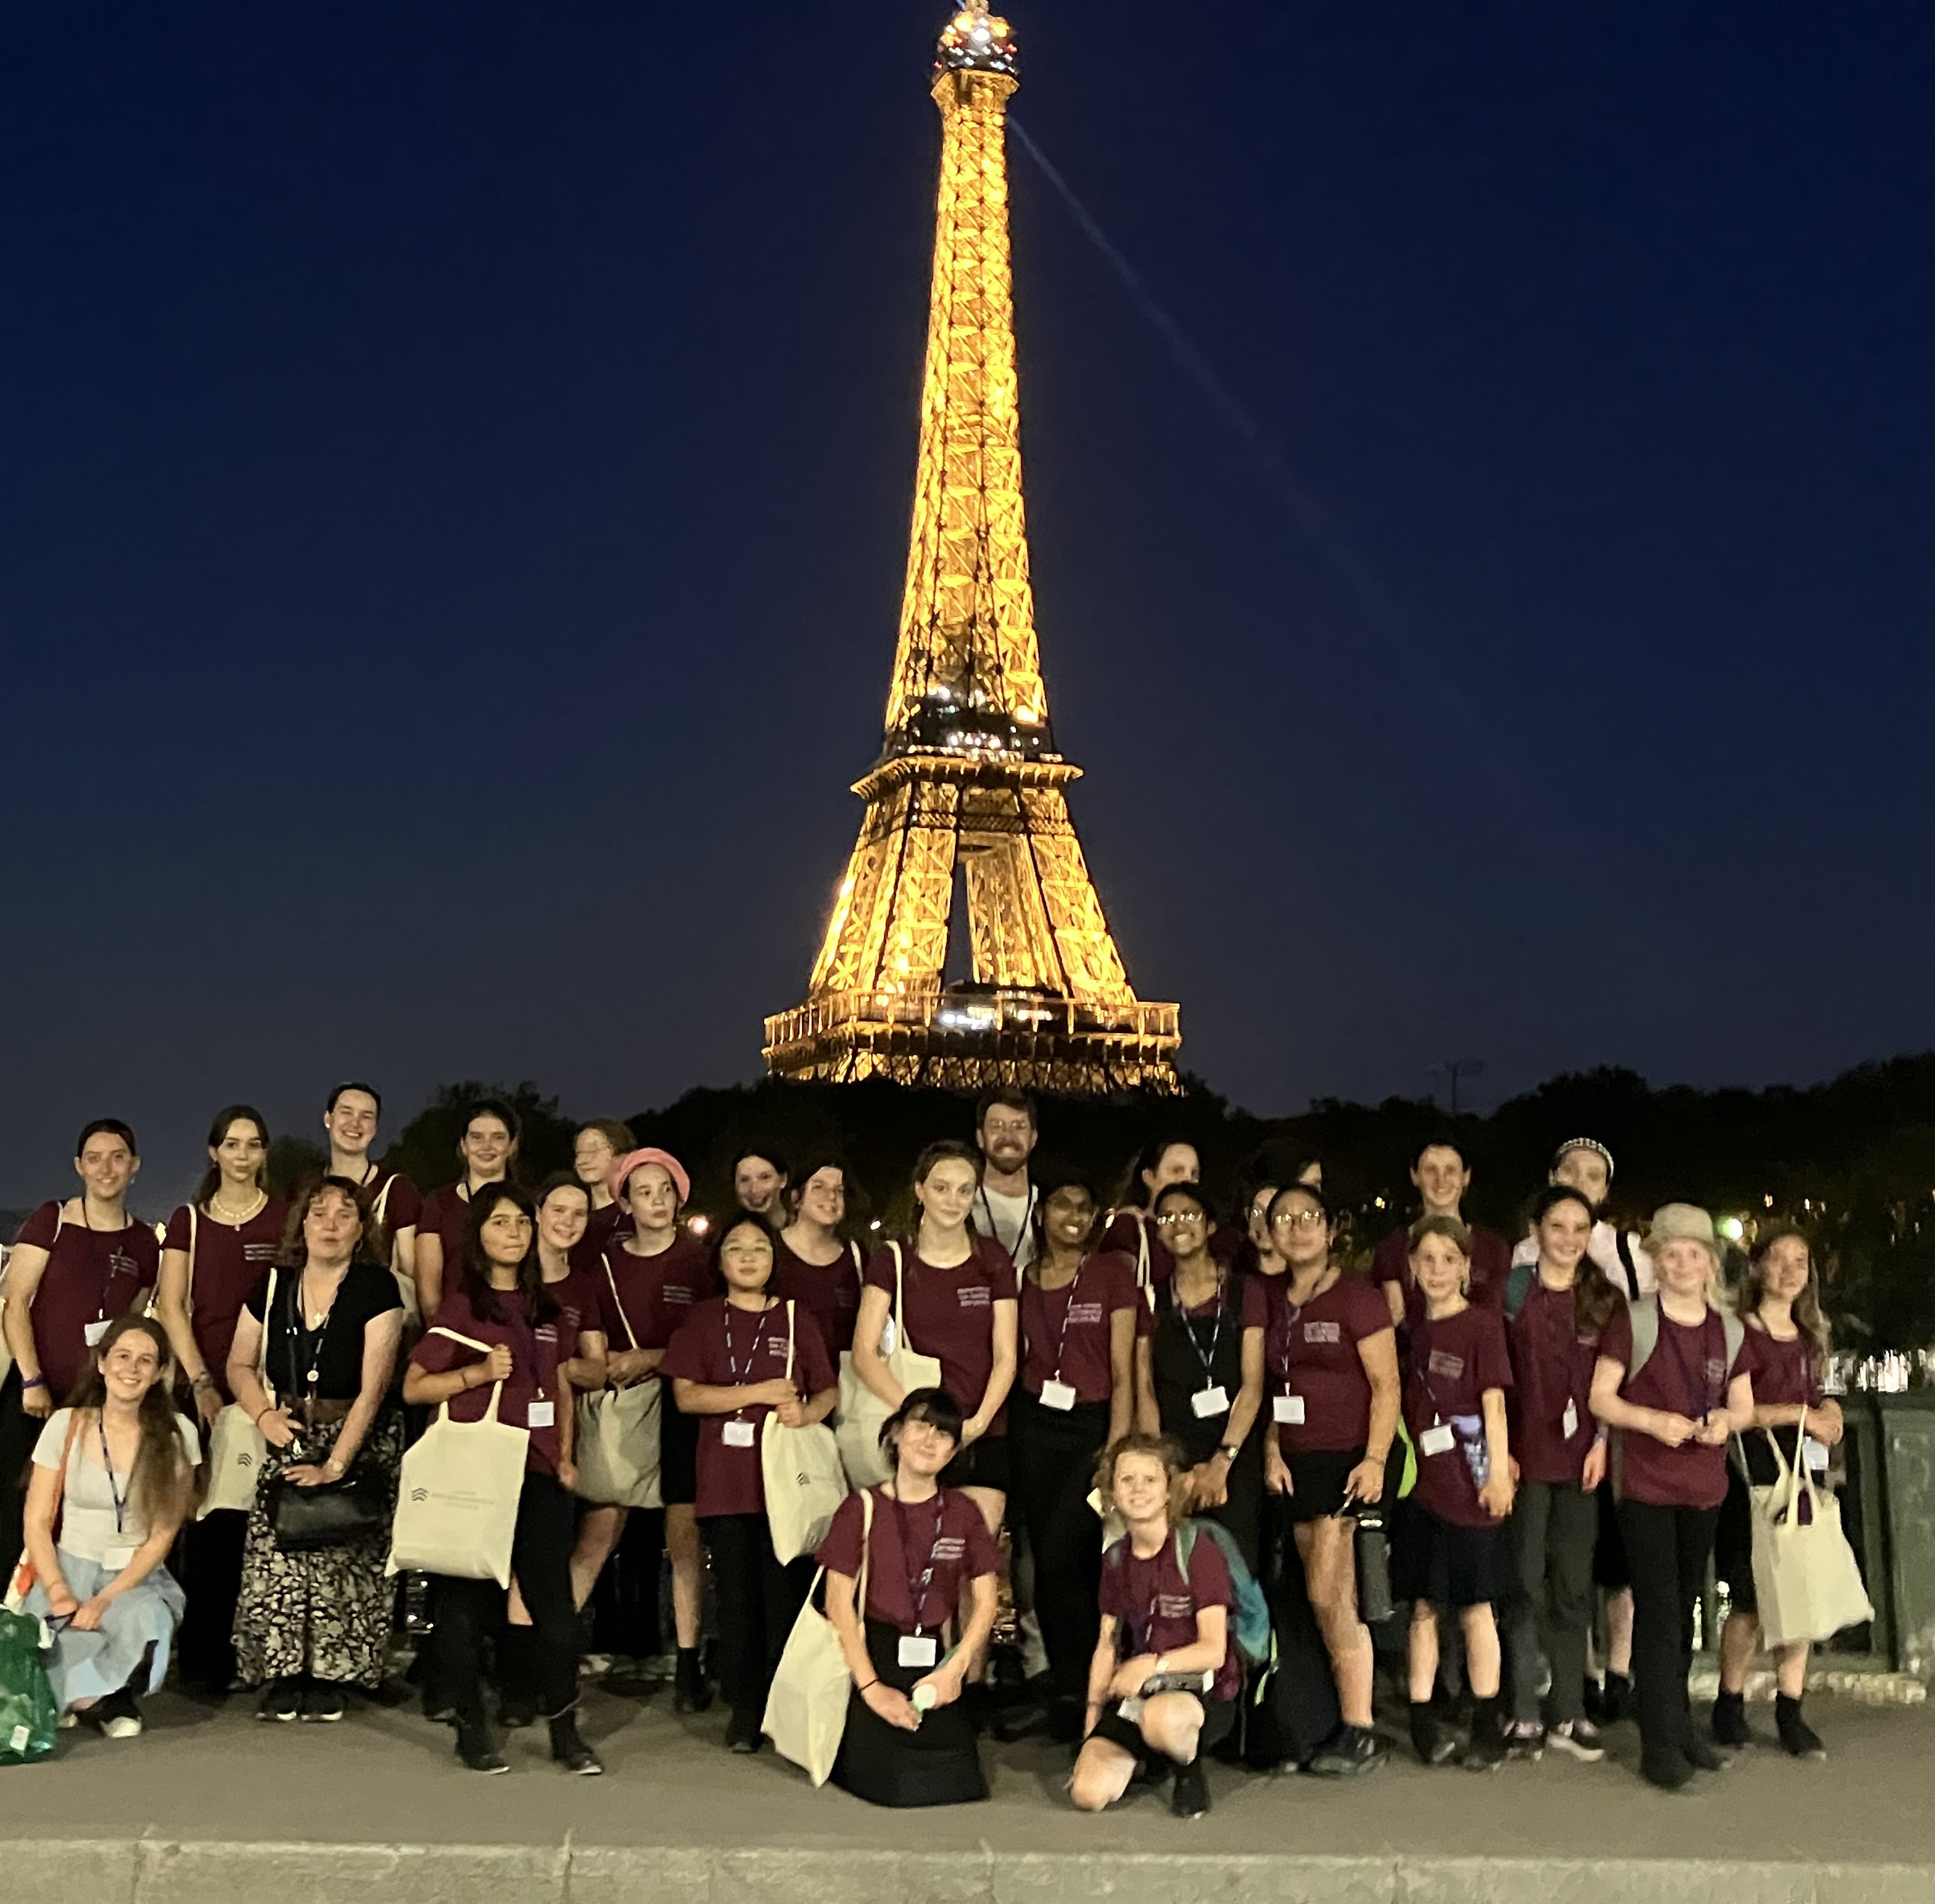 Girl Choristers stood in front of the illuminated Eiffel Tower